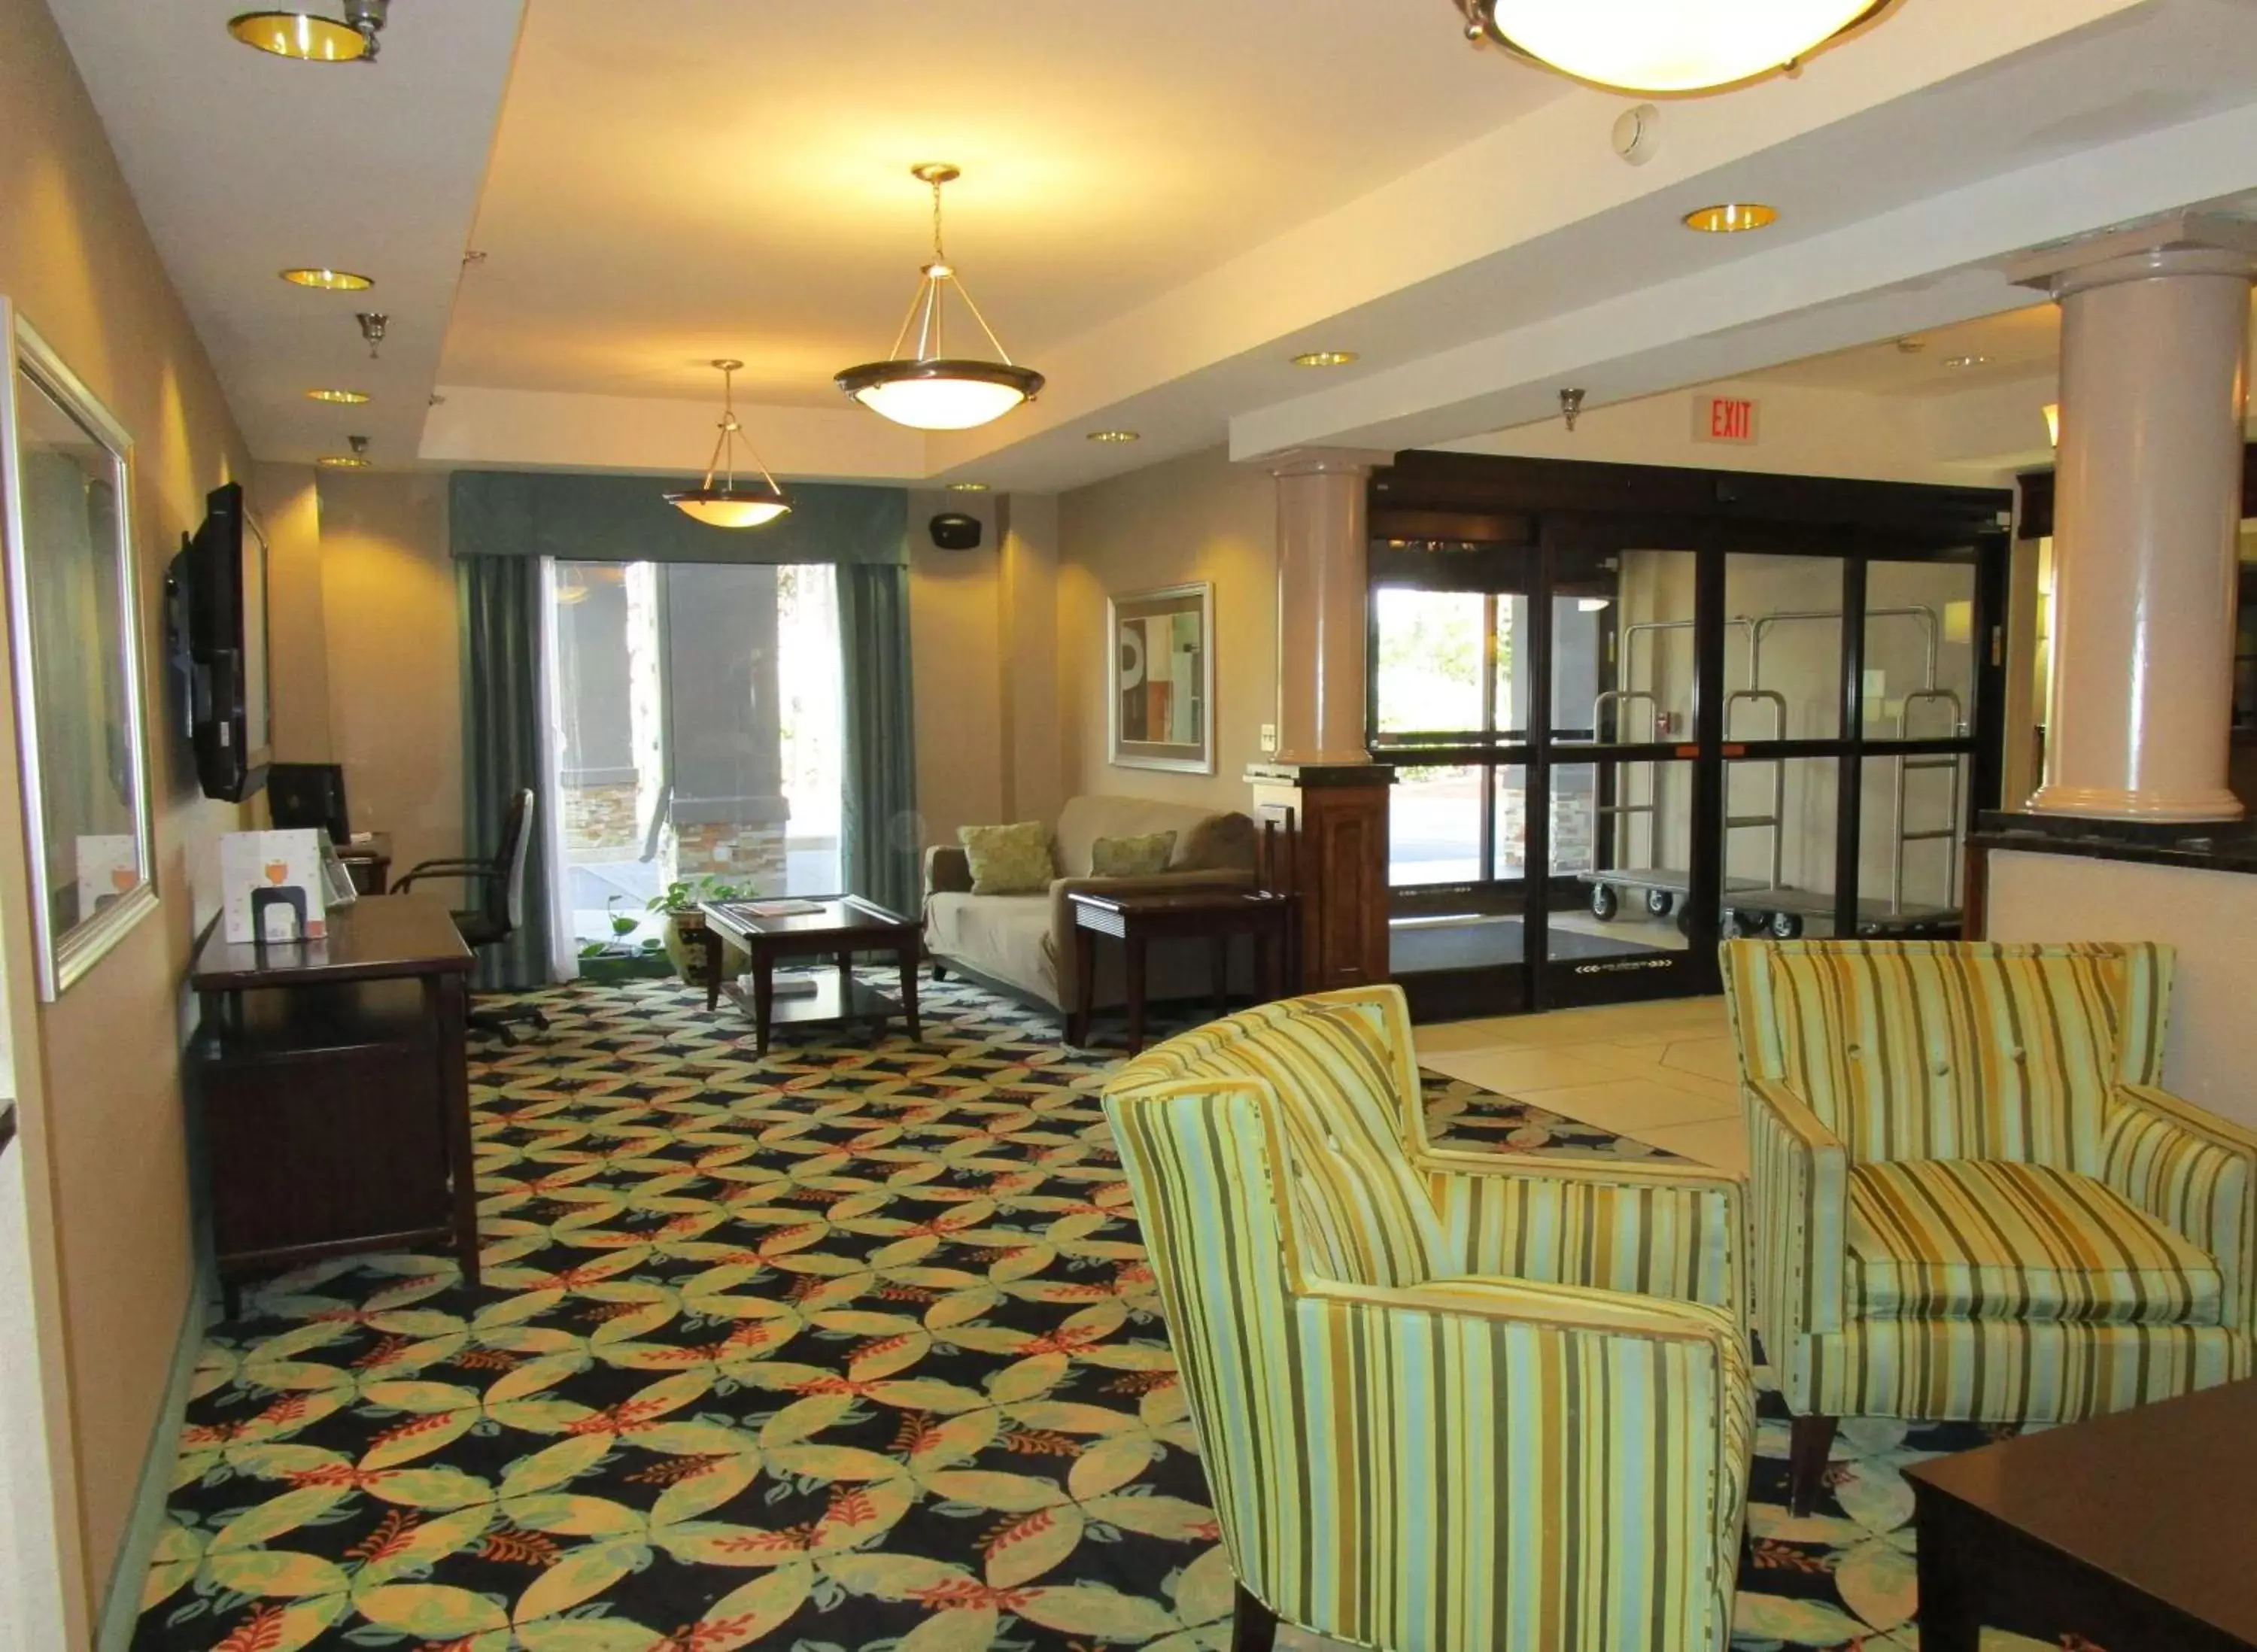 Lobby or reception in Country Inn & Suites, Murrells Inlet, SC